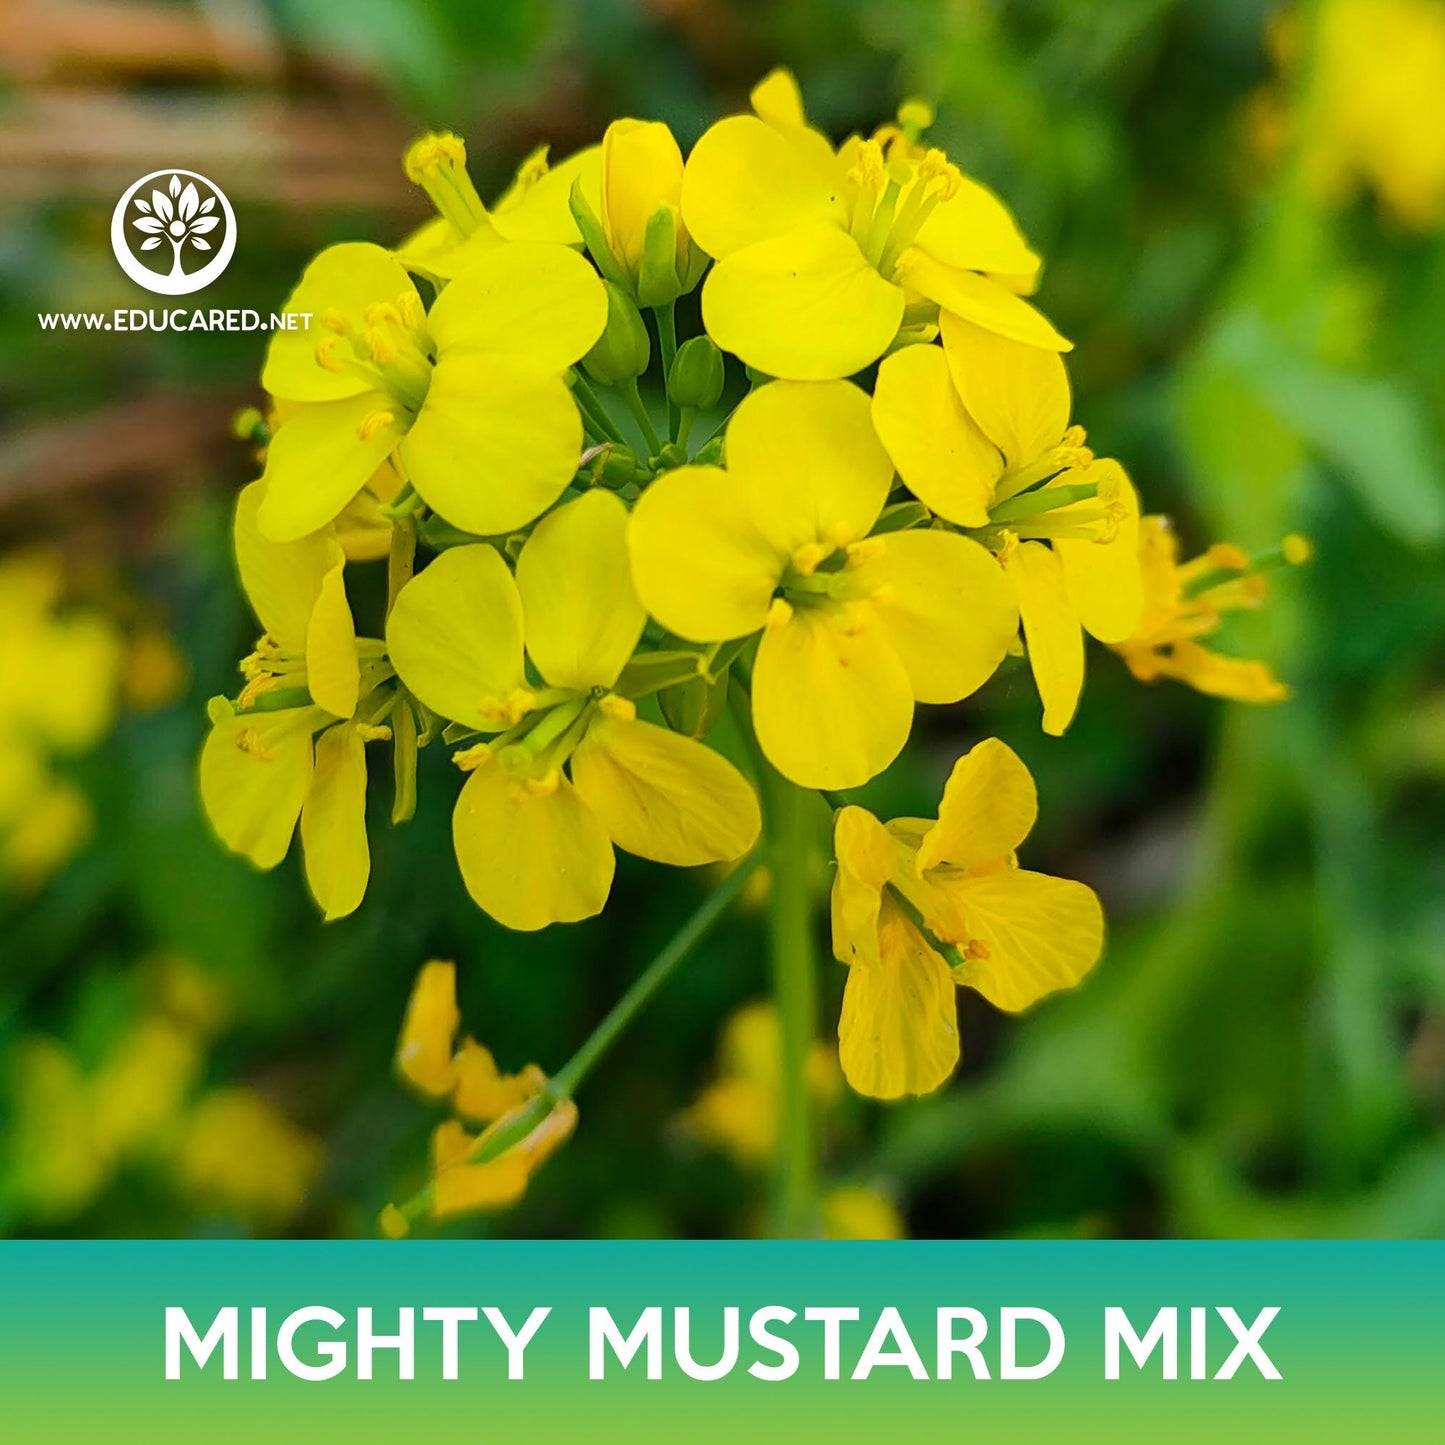 Mighty Mustard Mix Seeds, Mighty Mustard Trifecta Power Blend Cover Crop